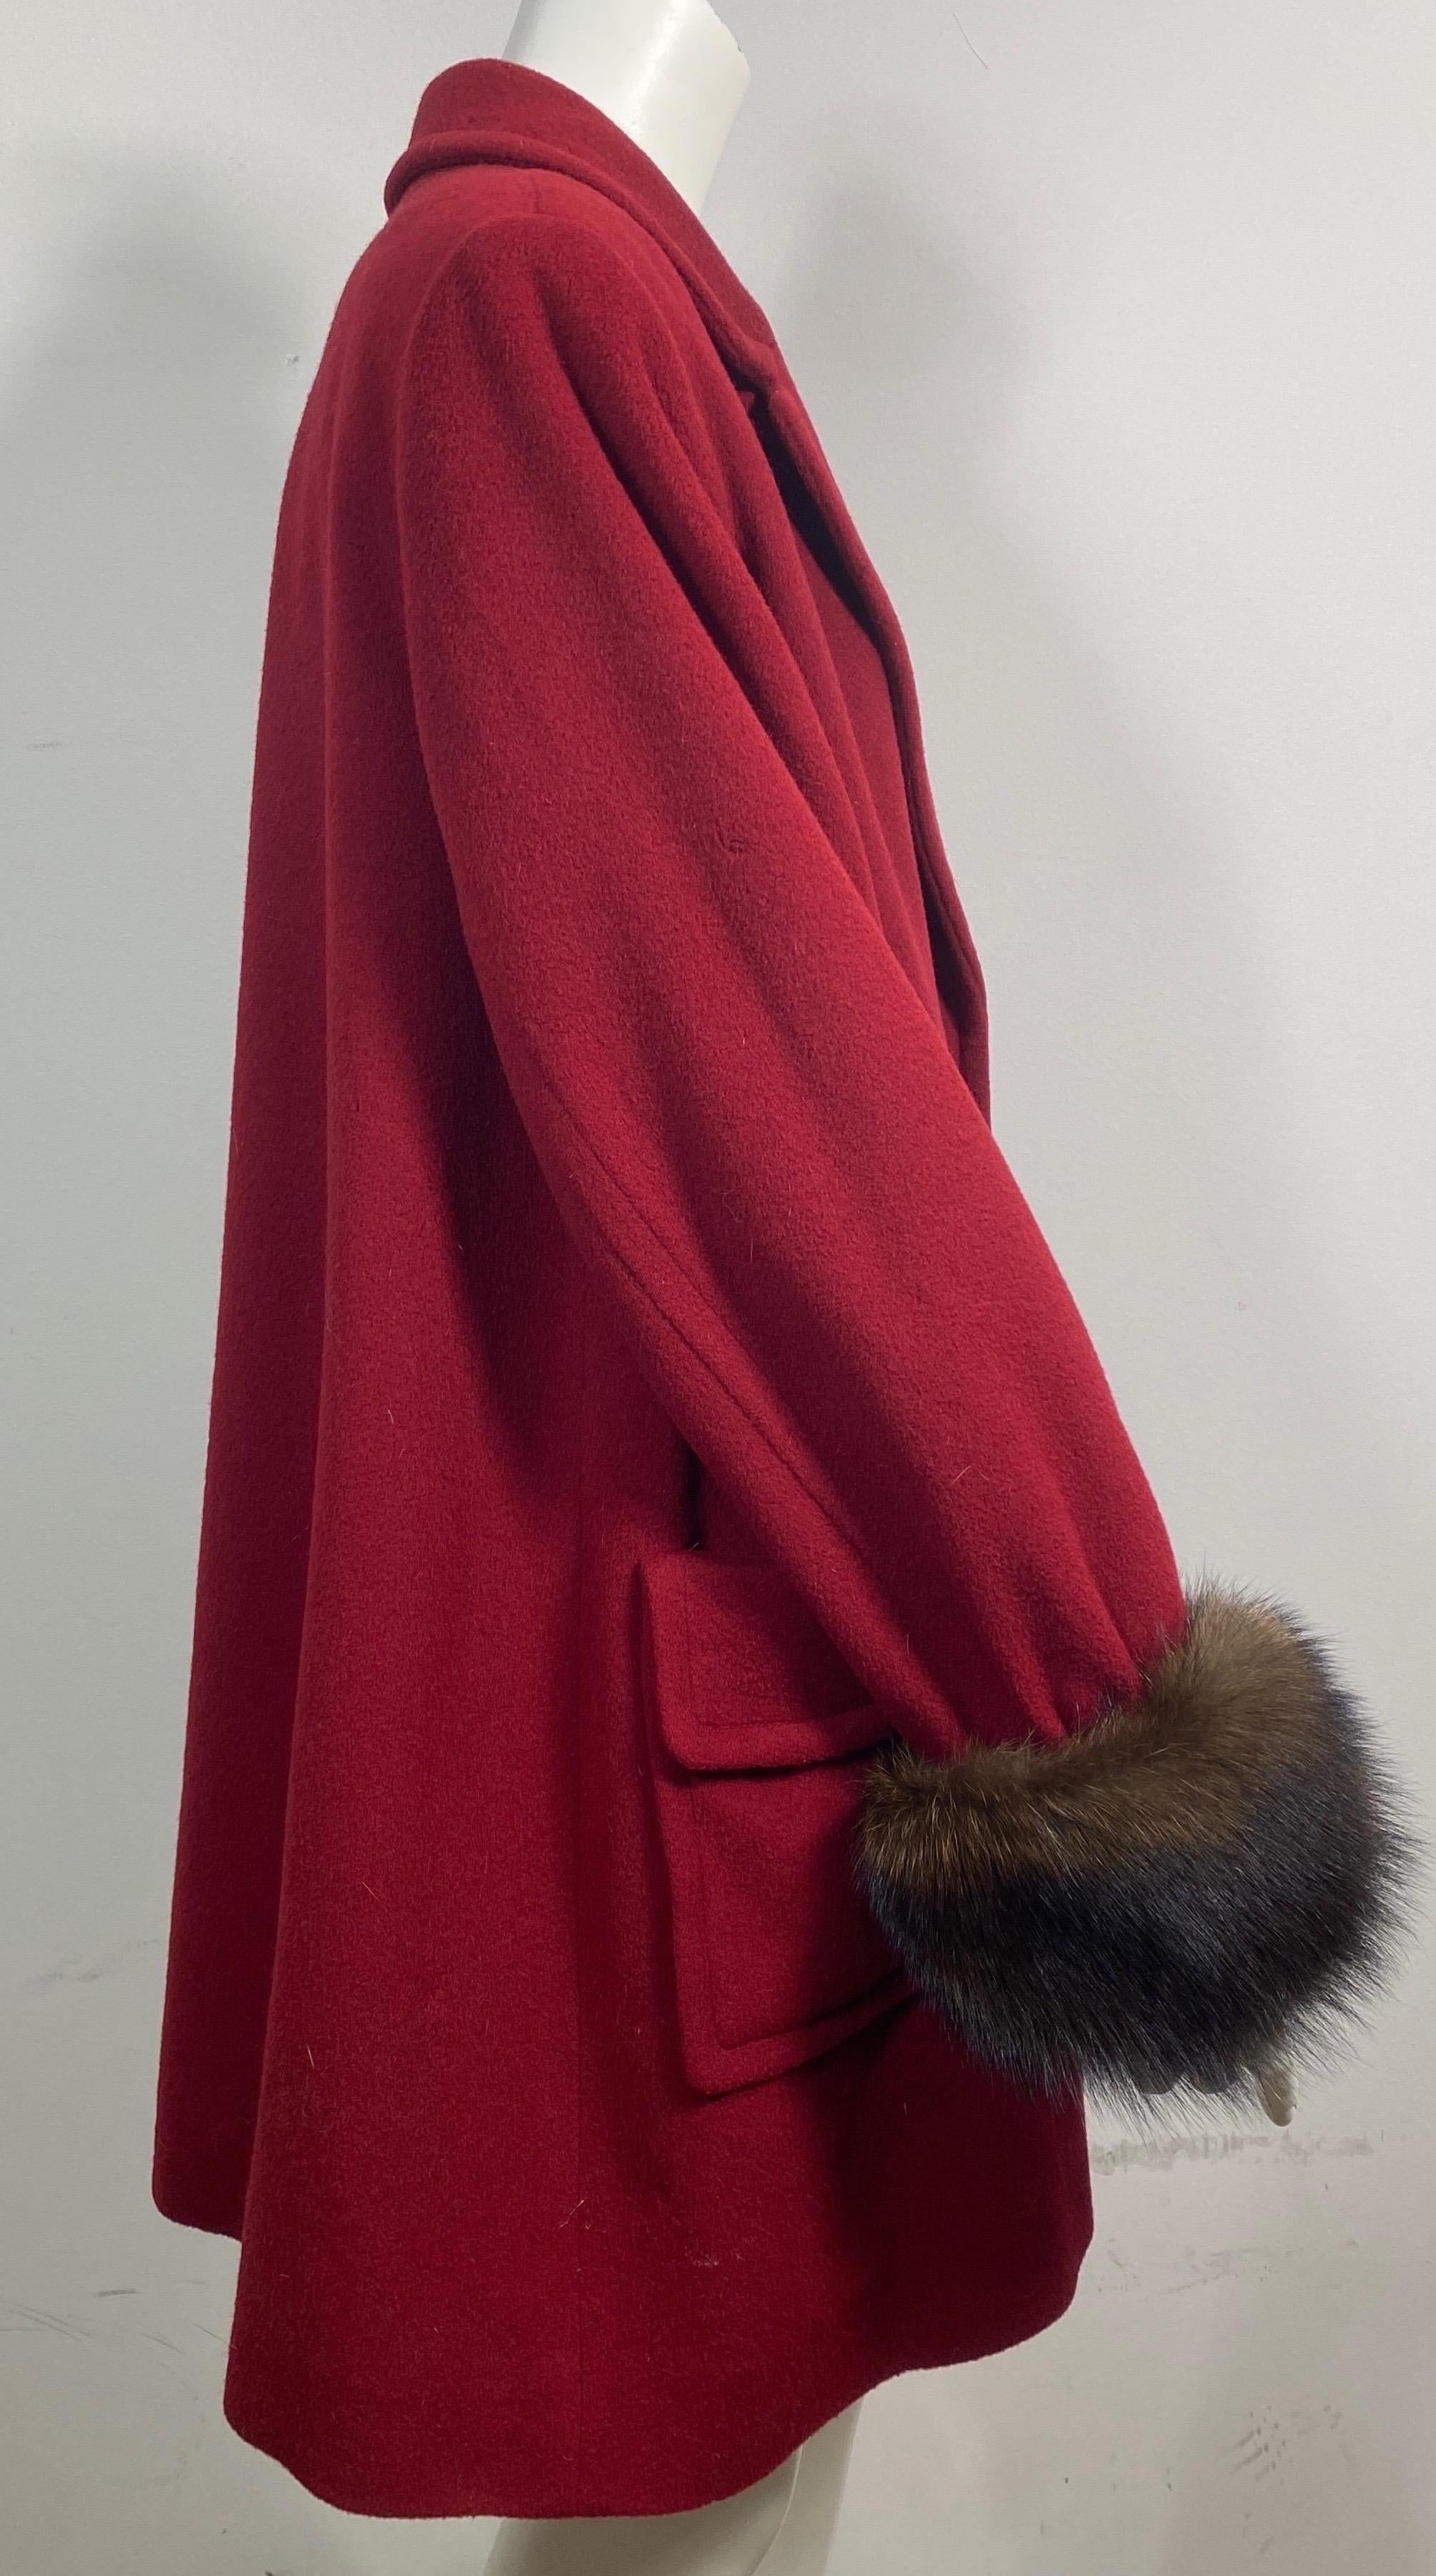 Yves Saint Laurent 1990’s Garnet Cashmere and Fox Swing Coat -Size Large  For Sale 5